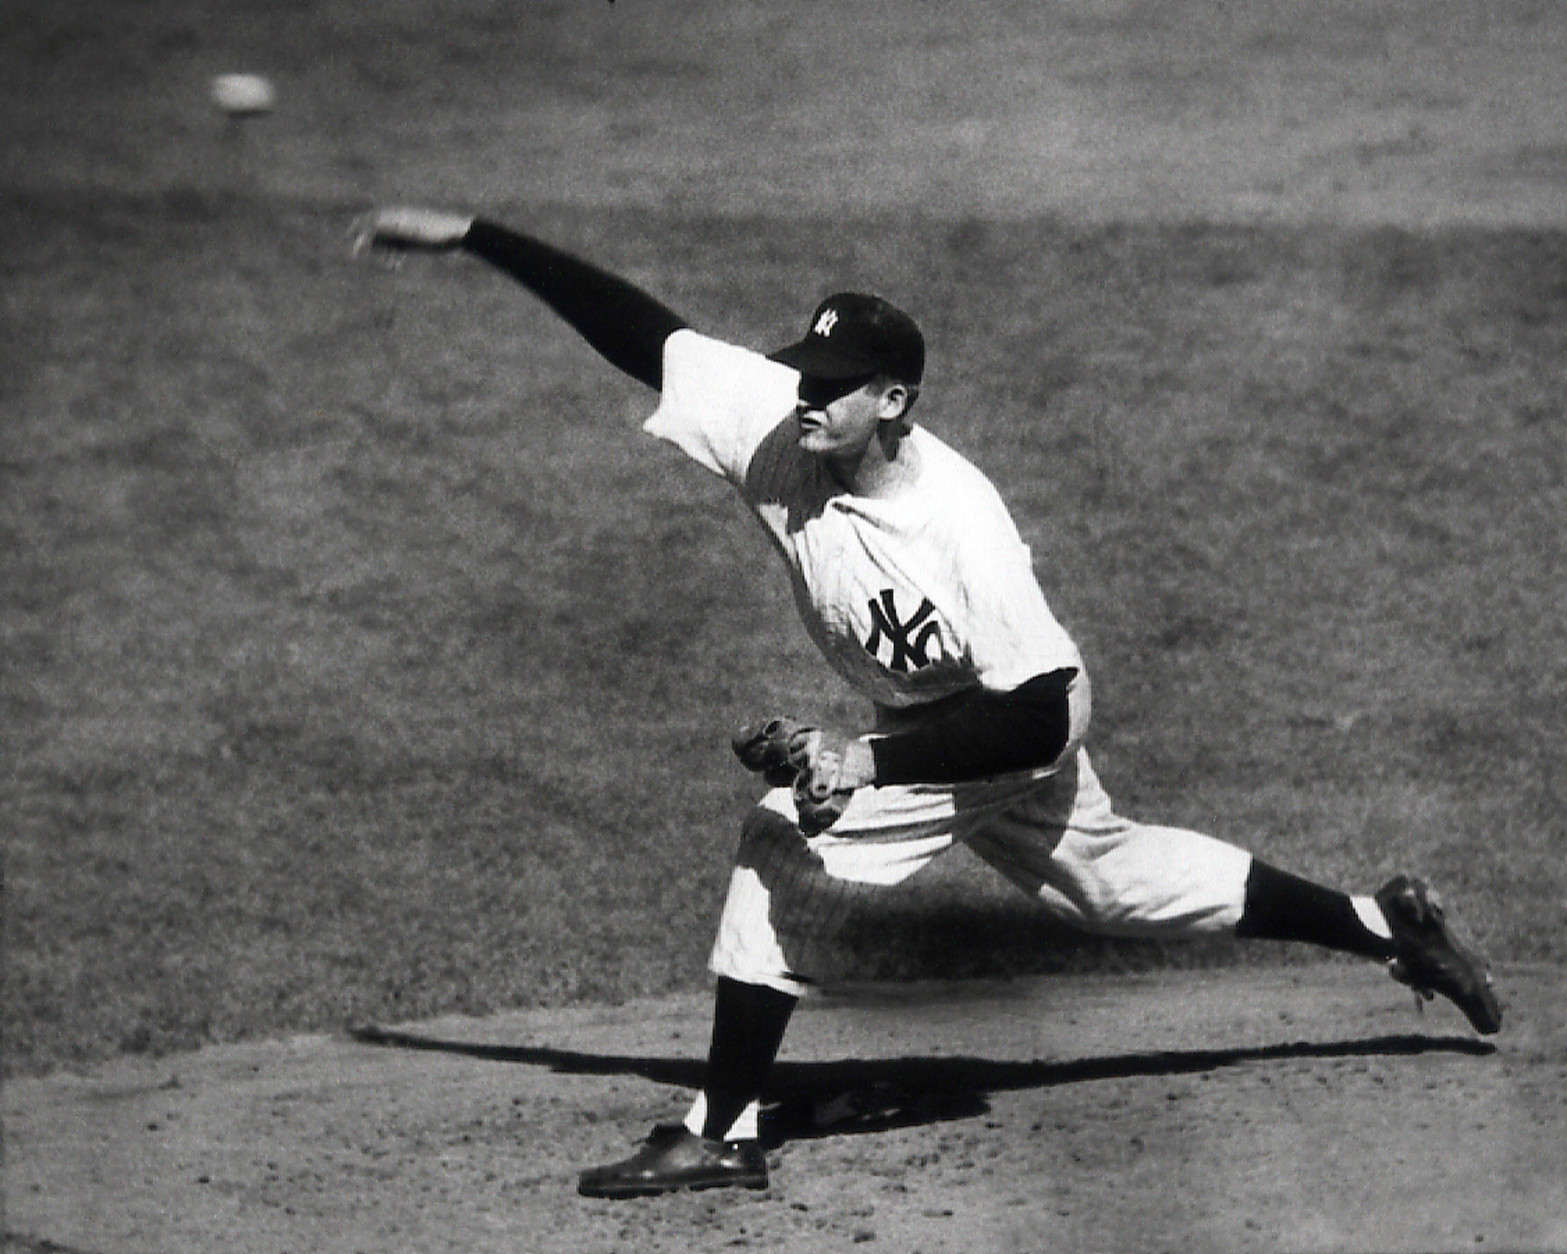 FILE - This Oct. 8, 1956, file photo, shows New York Yankees pitcher Don Larsen throwing against the Brooklyn Dodgers, enroute to a perfect game in the fourth inning of Game 5 of the World Series, in New York. Roy Halladay threw the second no-hitter in postseason history, leading the Philadelphia Phillies over the Cincinnati Reds 4-0 in Game 1 of the NL division series on Wednesday, Oct. 6, 2010. Larsen is the only other pitcher to throw a postseason no-hitter.  (AP Photo/File)